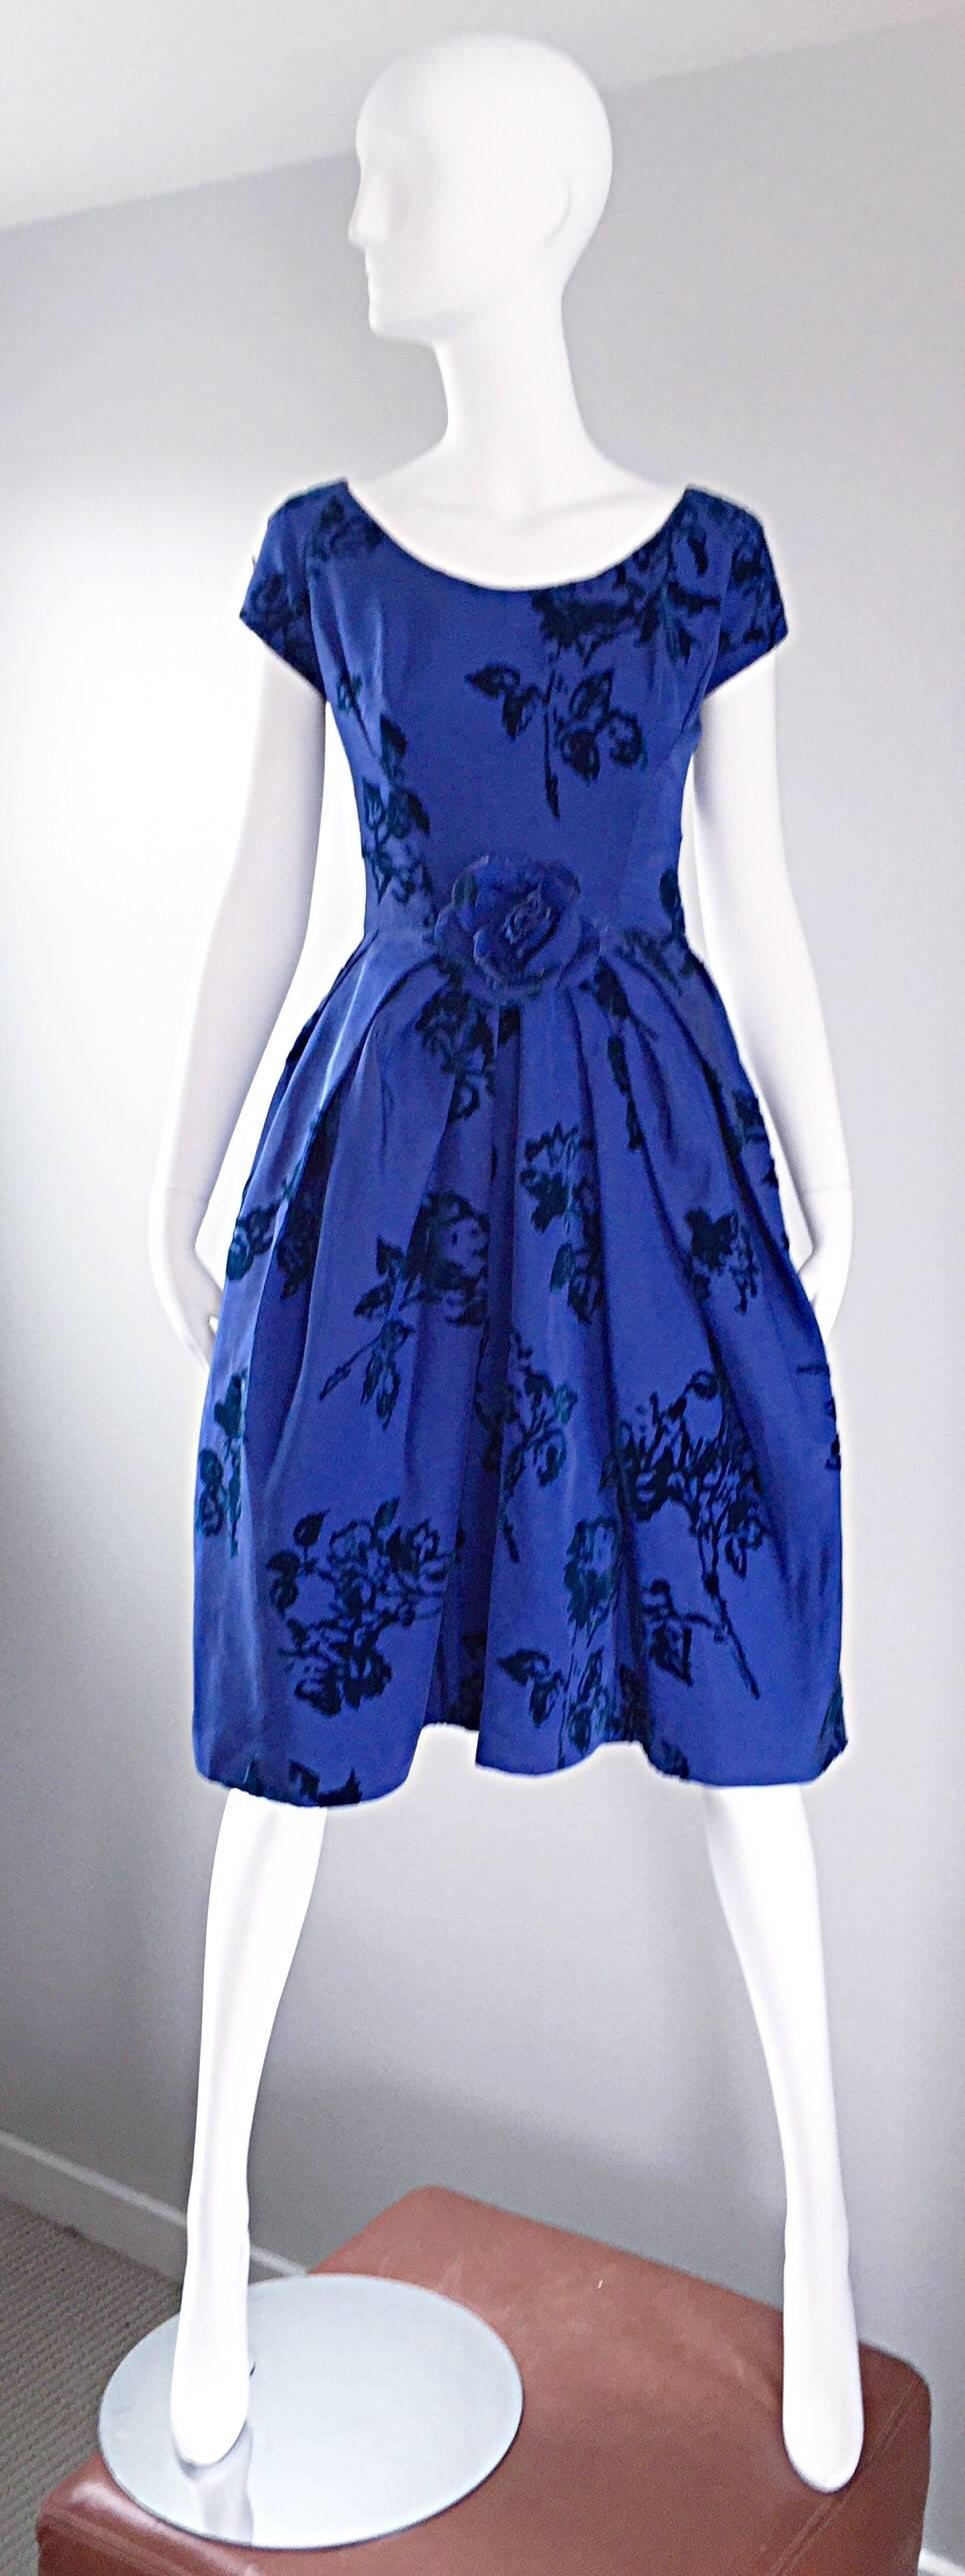 Exceptional vintage 1950s demi couture royal blue silk and cut-out velvet fit n' flare (New Look) cocktail dress and crinoline by MISS BROOKS! Words cannot even begin to describe how utterly gorgeous this dress is! Striking royal blue color with